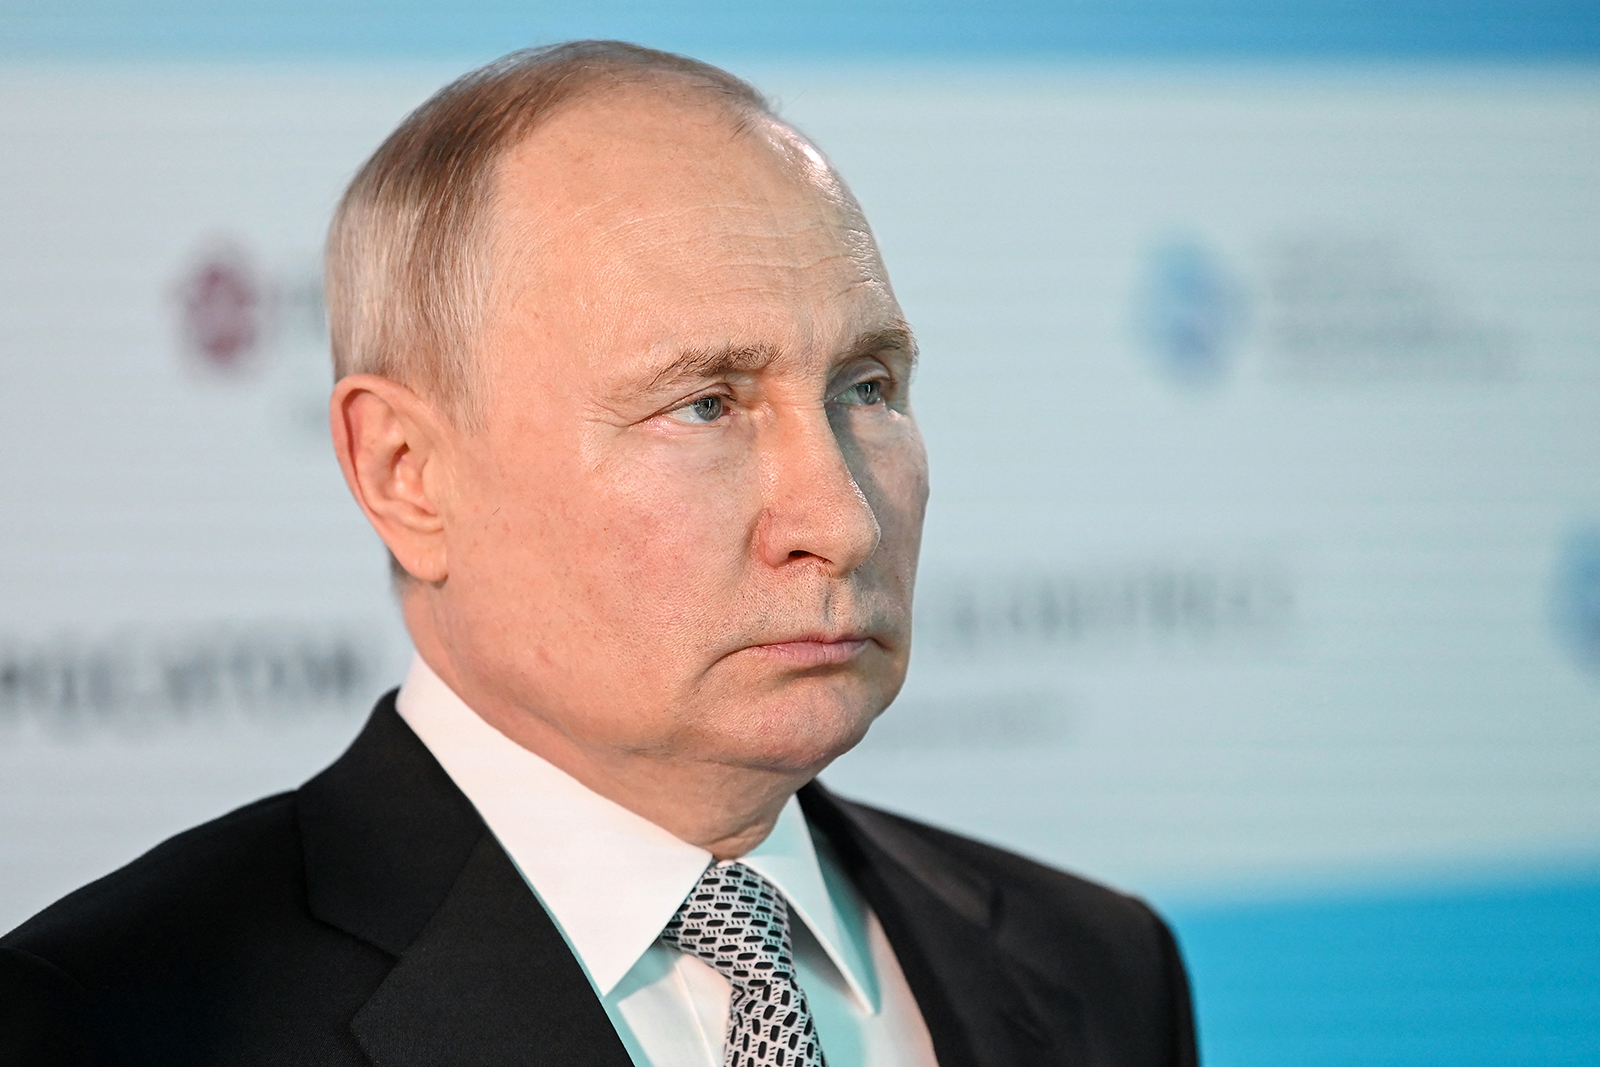 Vladimir Putin attends a forum in Moscow on July 13.